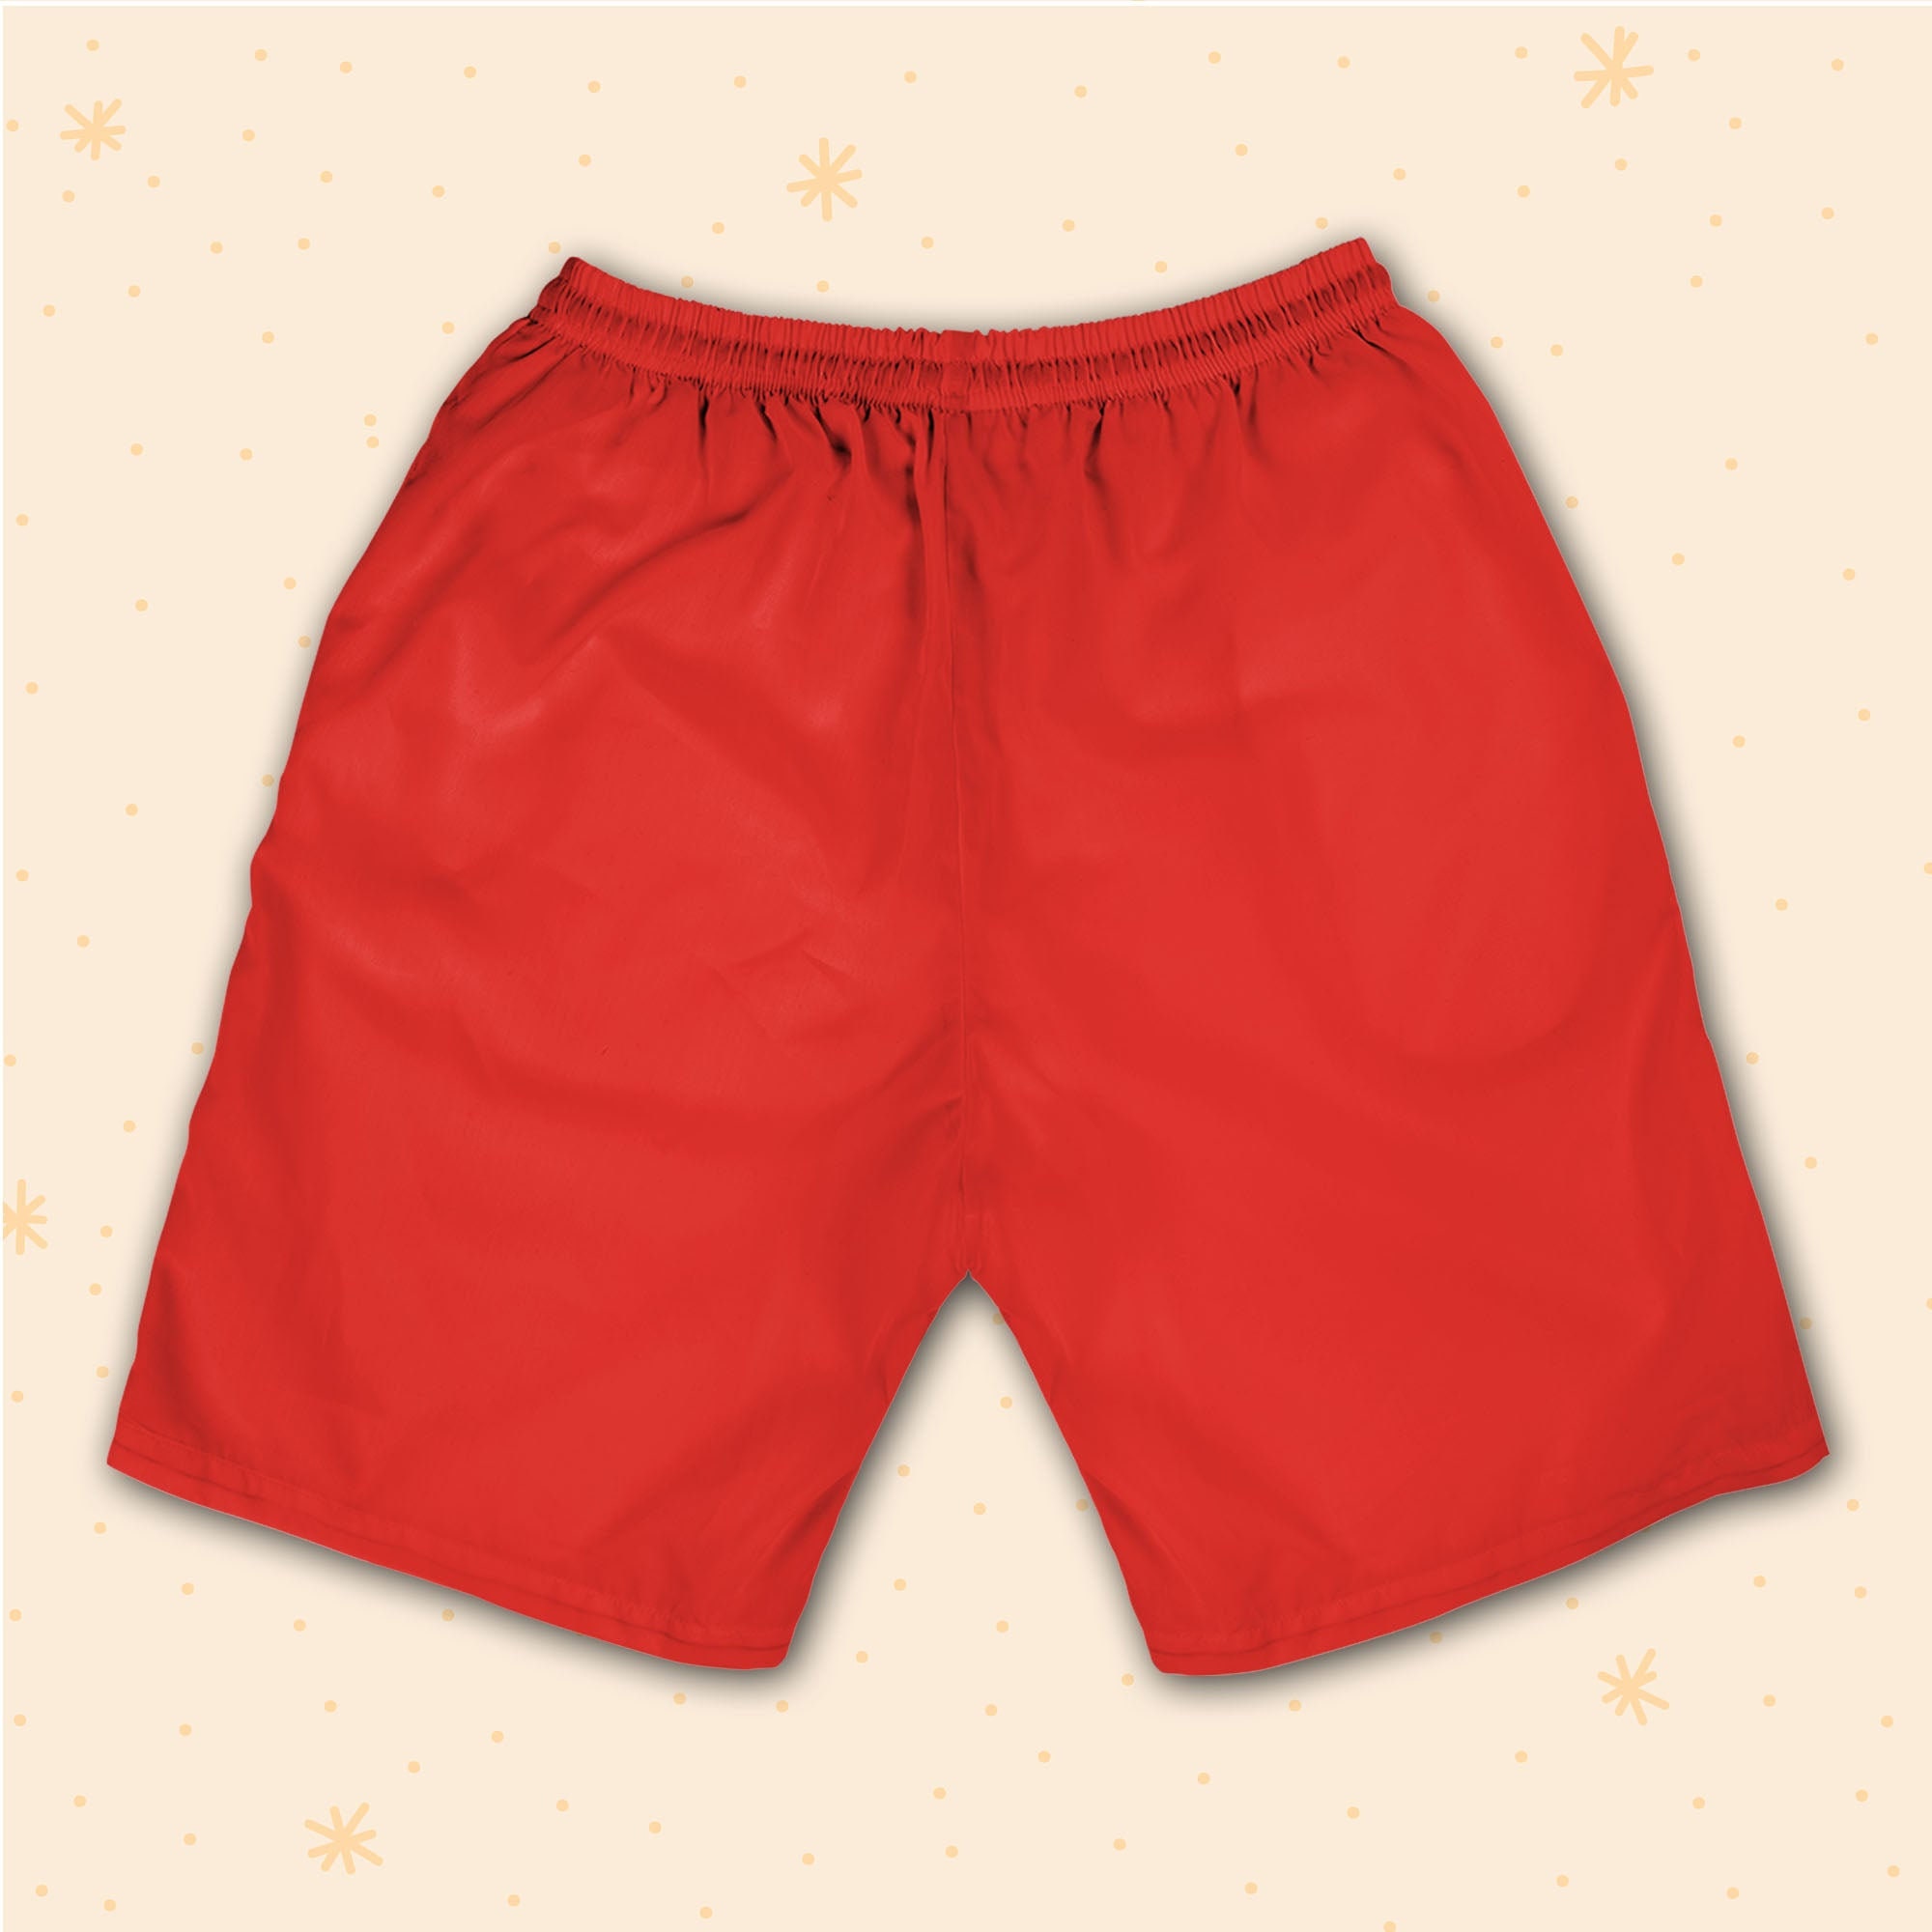 Discover Personalize Mcqueen Red Shorts JS Shorts Sports Outfits Cute Gifts For Fans Disney